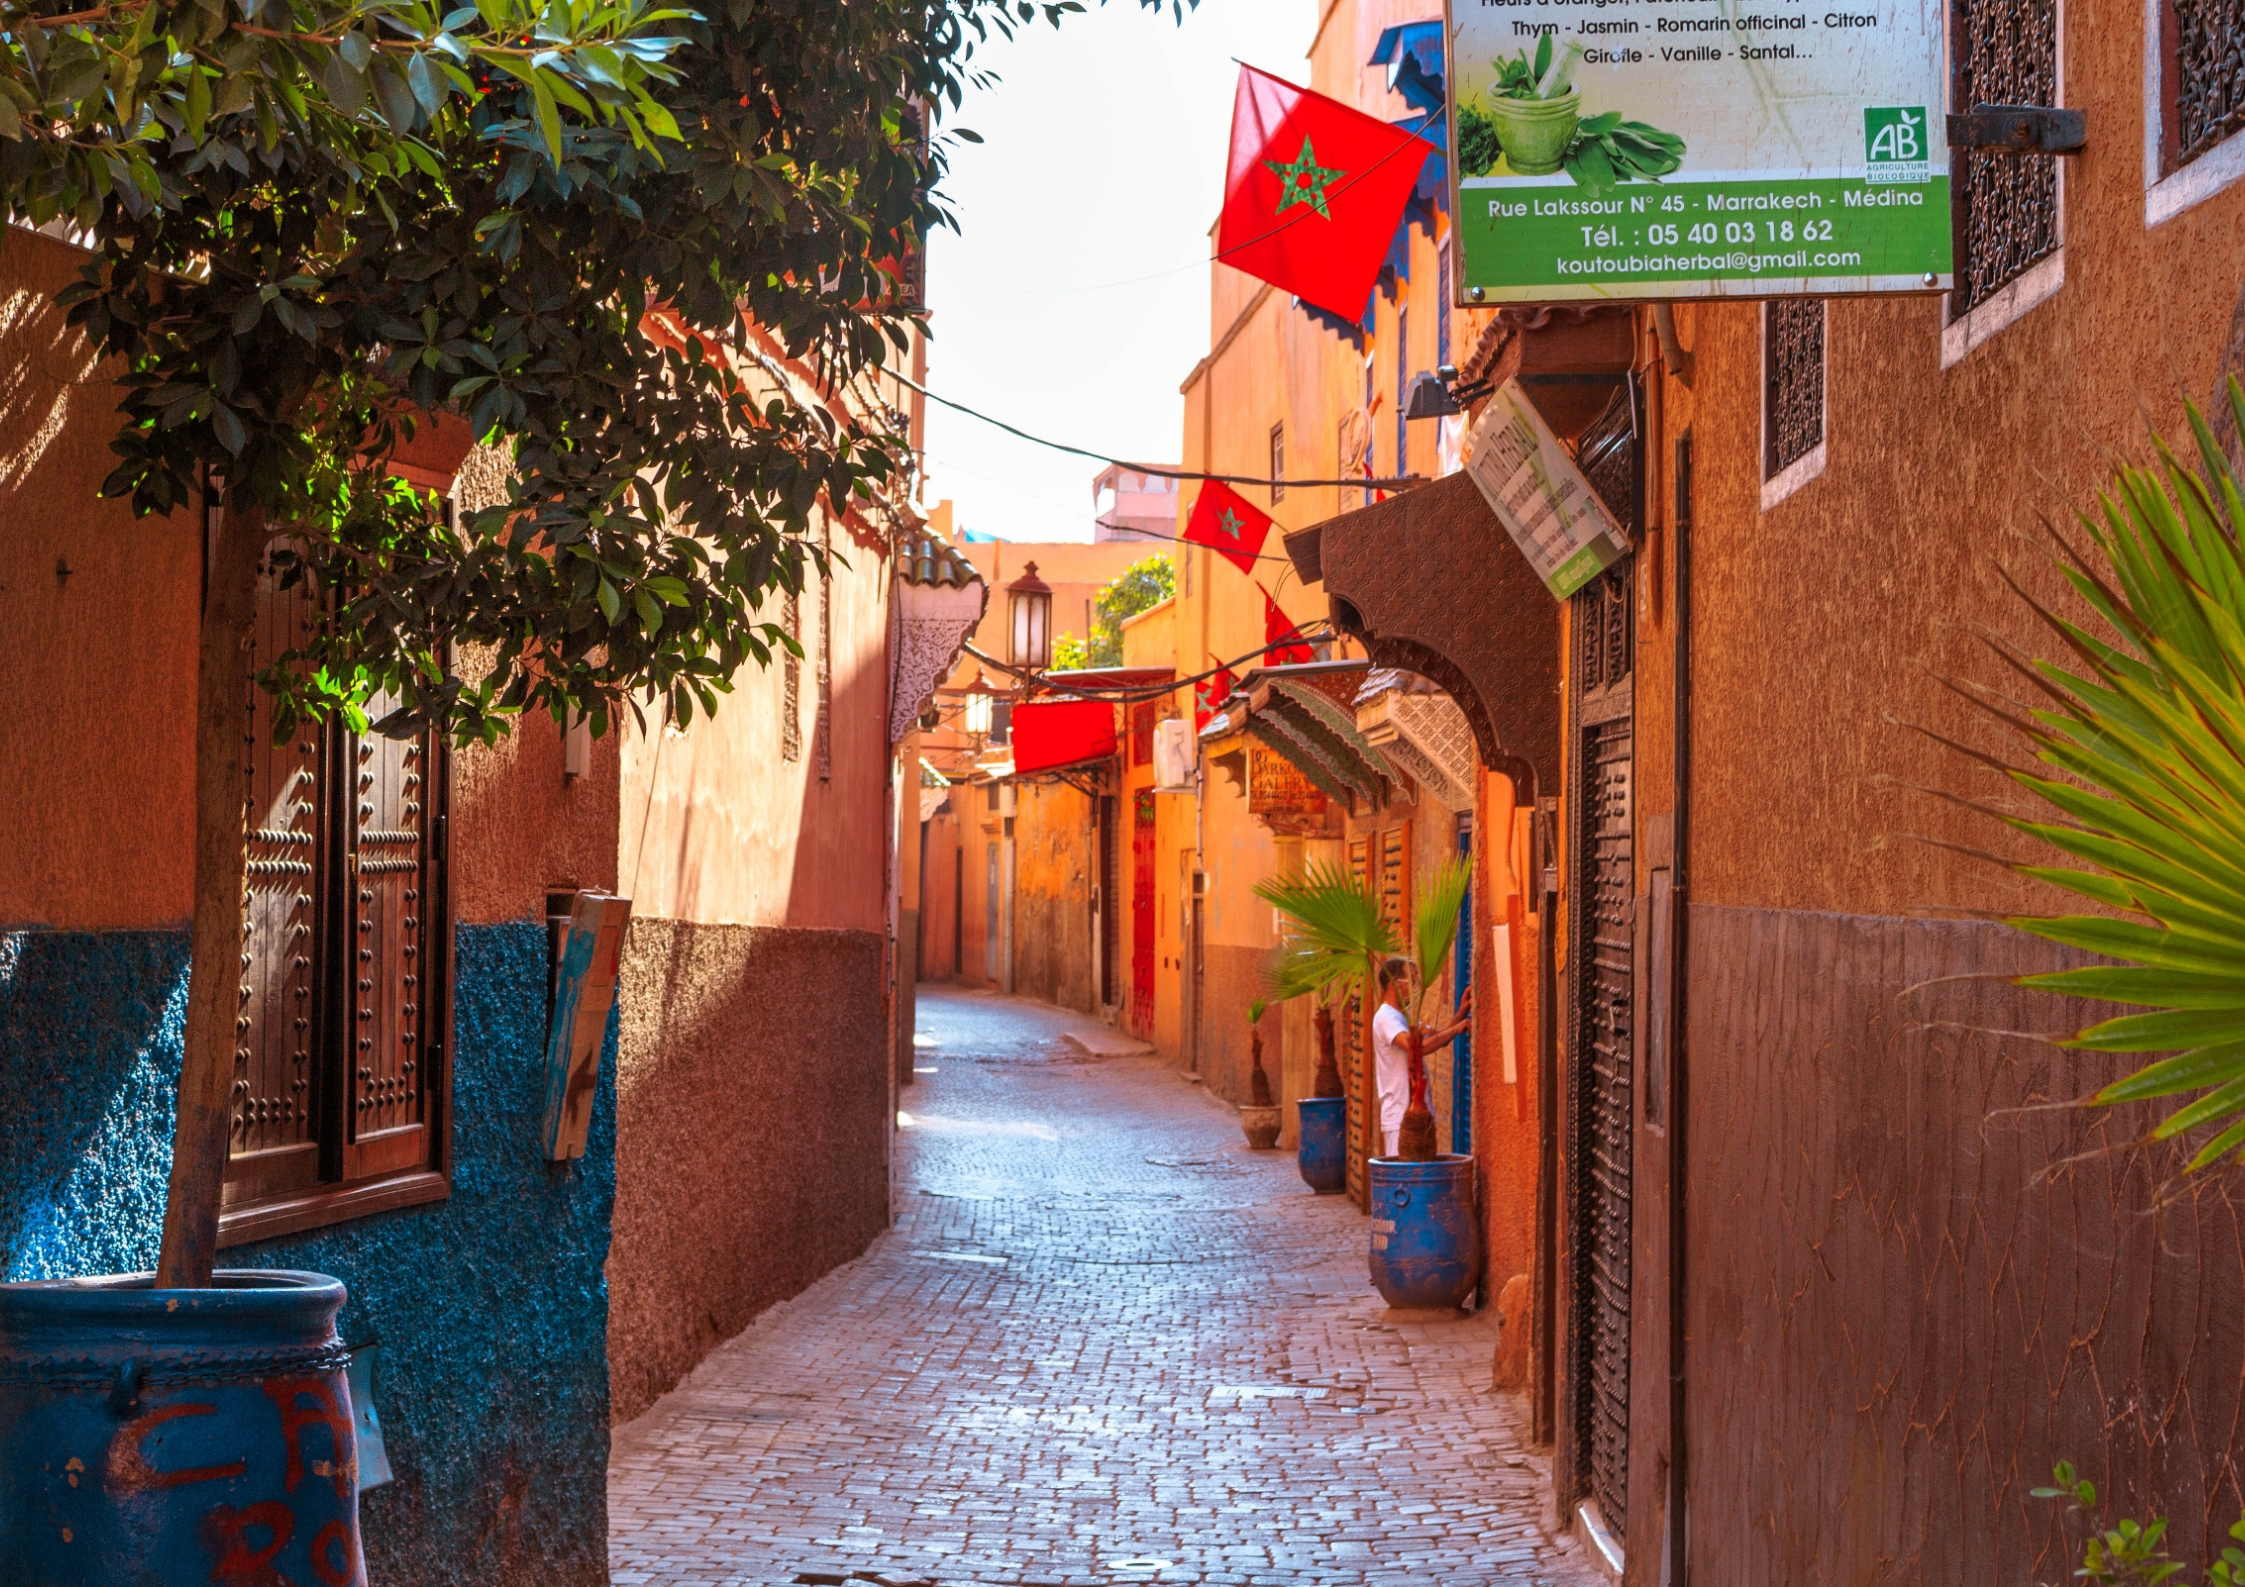 Marrakesh. The Red City. The Daughter of the Desert.